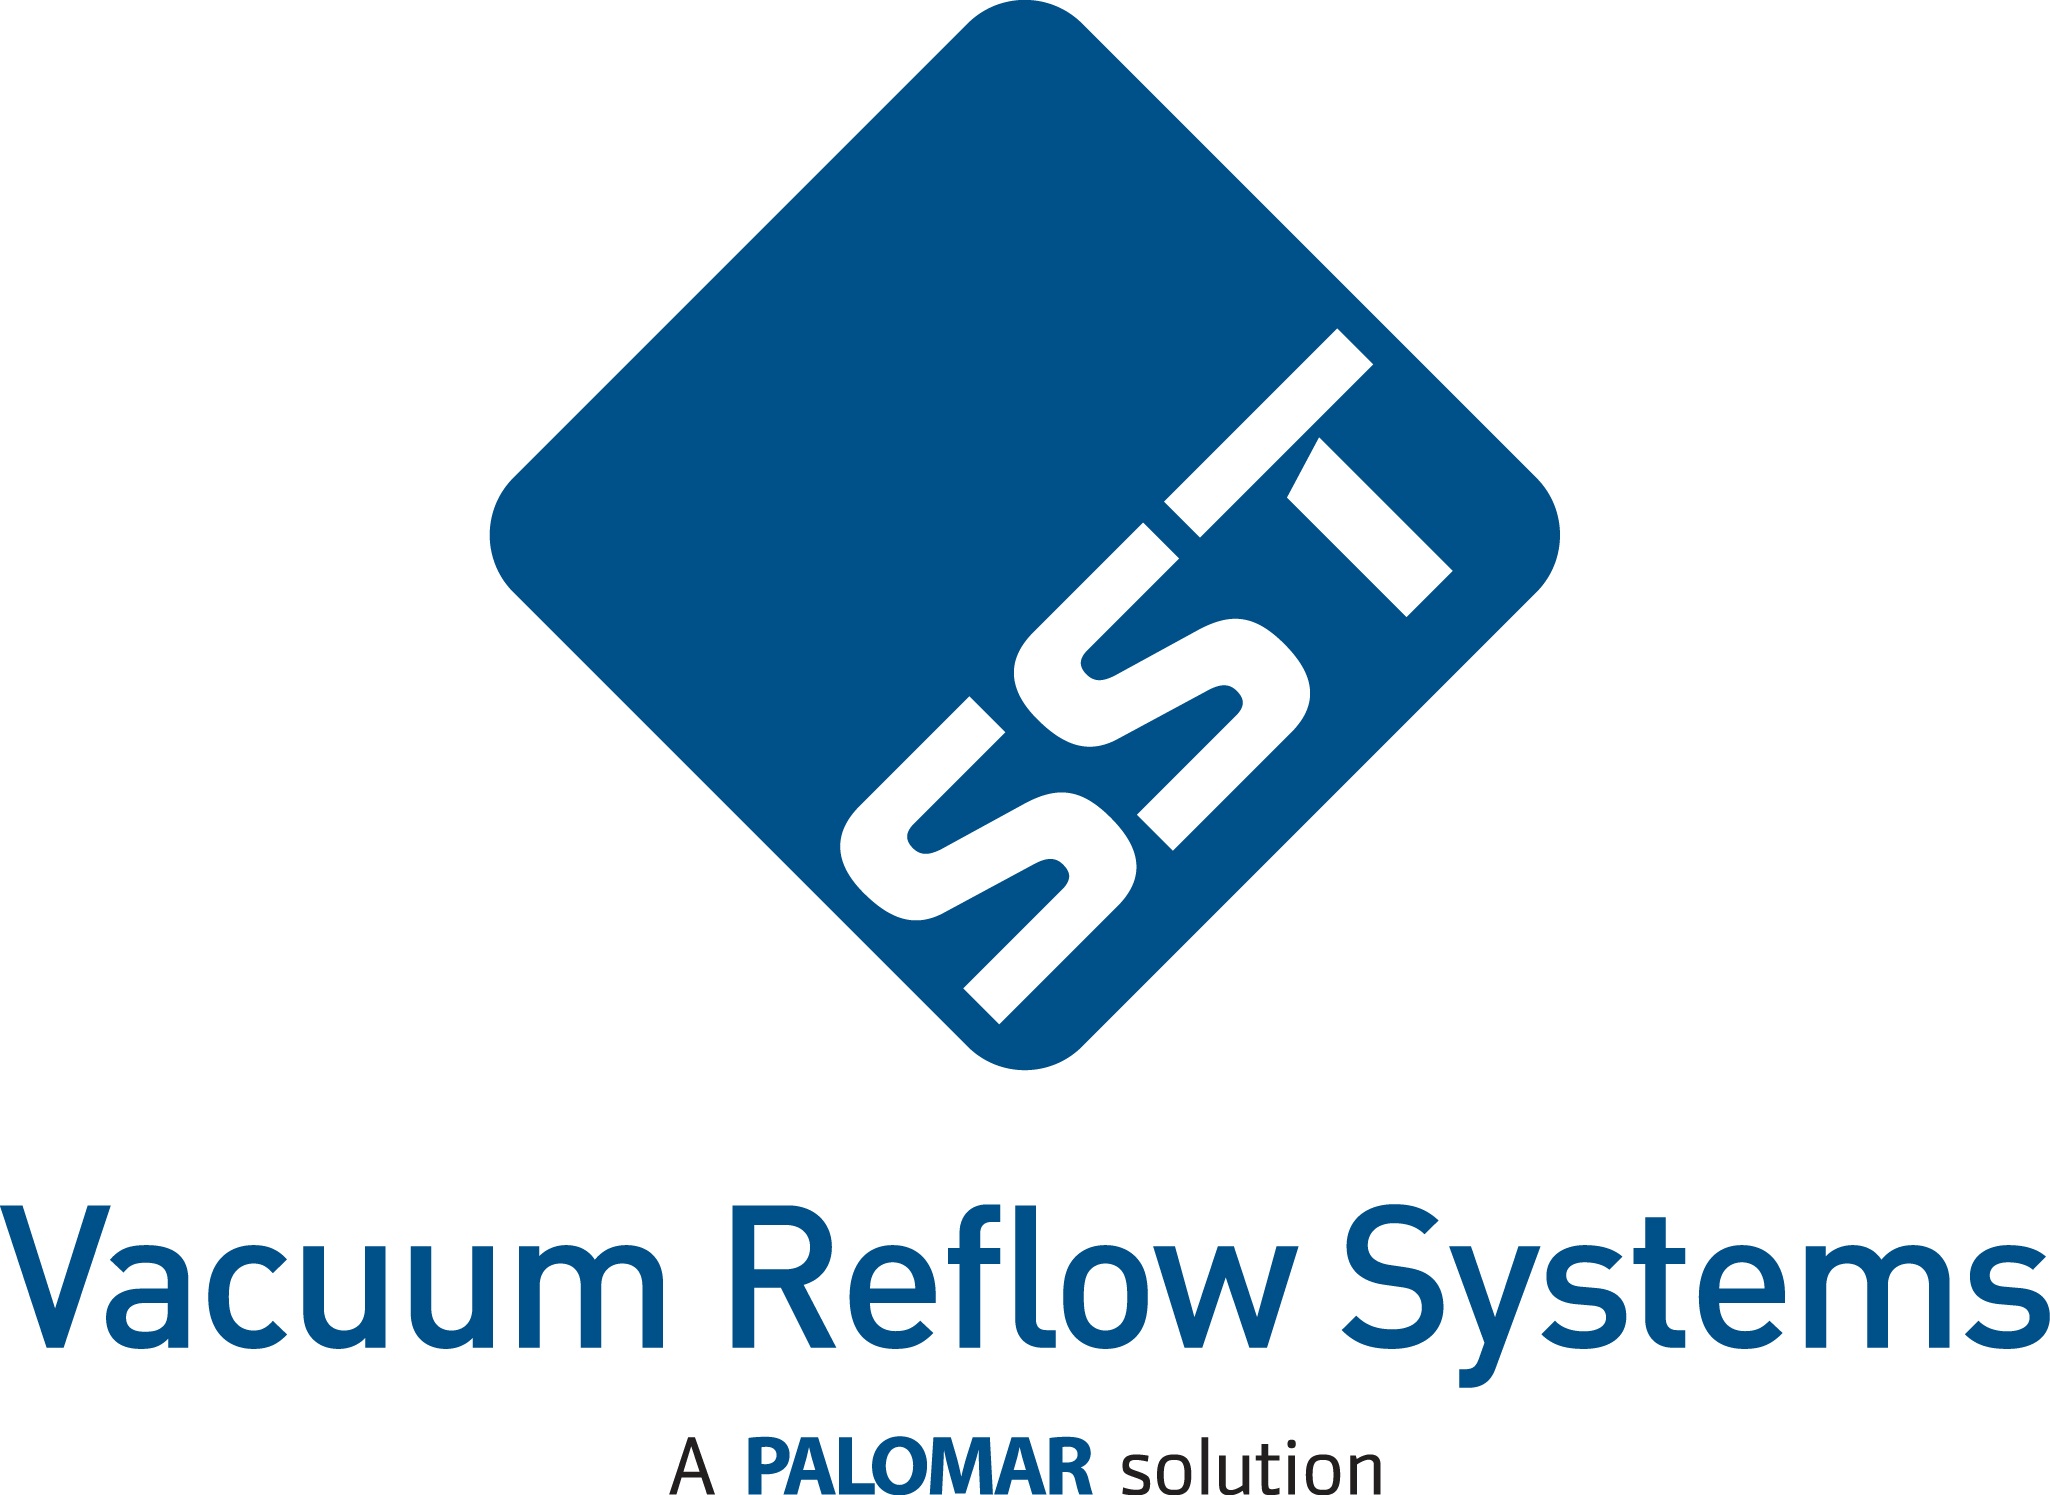 SST Vacuum Reflow Systems